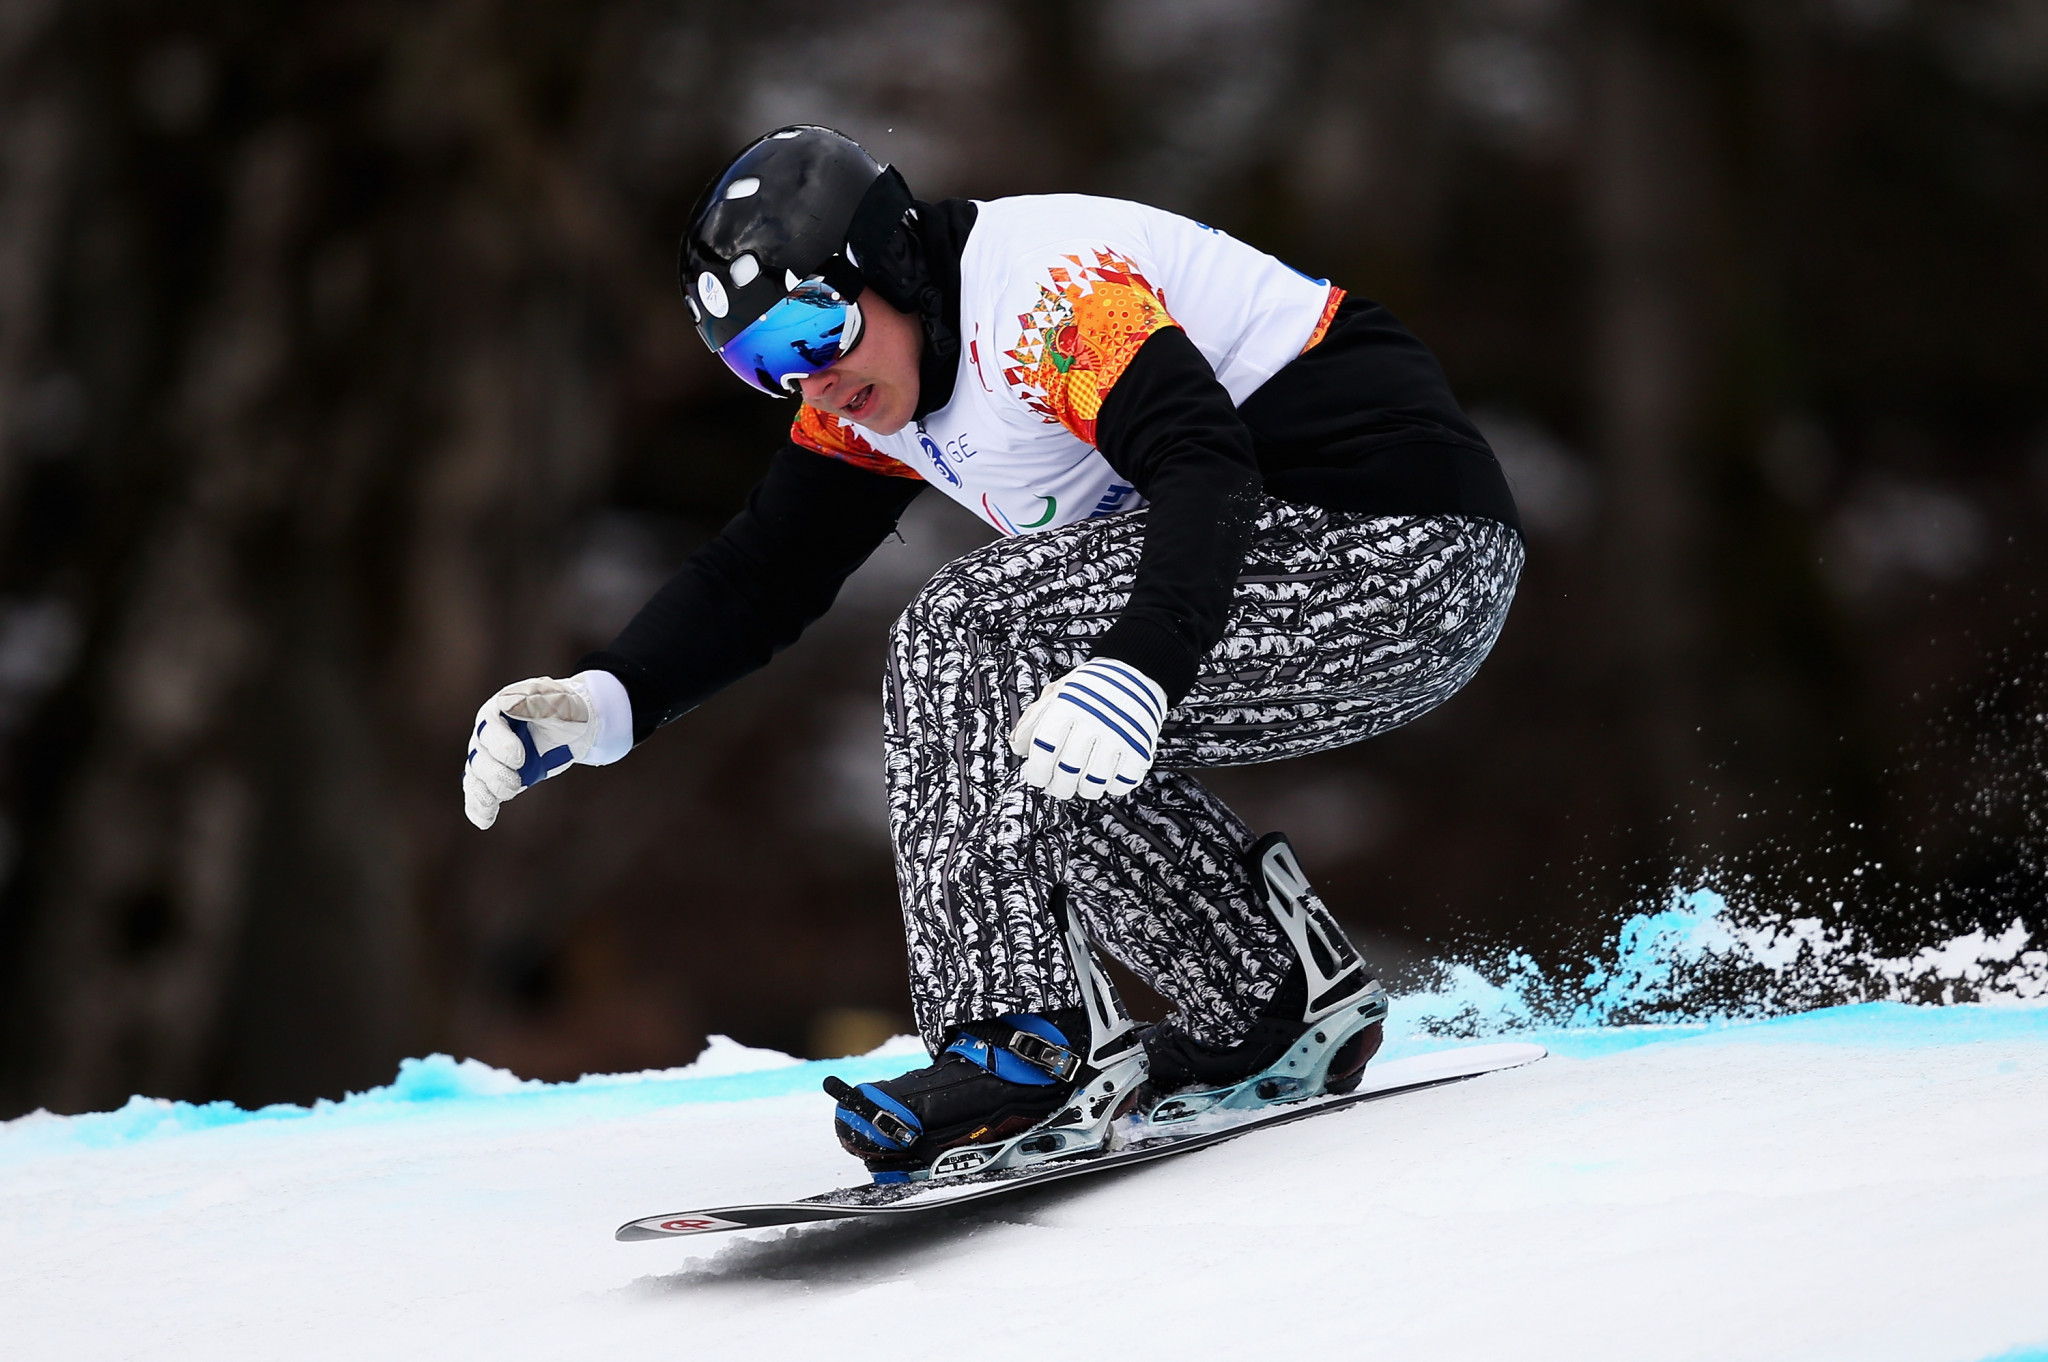 Snowboarder Matti Suur-Hamari won Finland's only Paralympic gold medal at Pyeongchang 2018 ©Getty Images